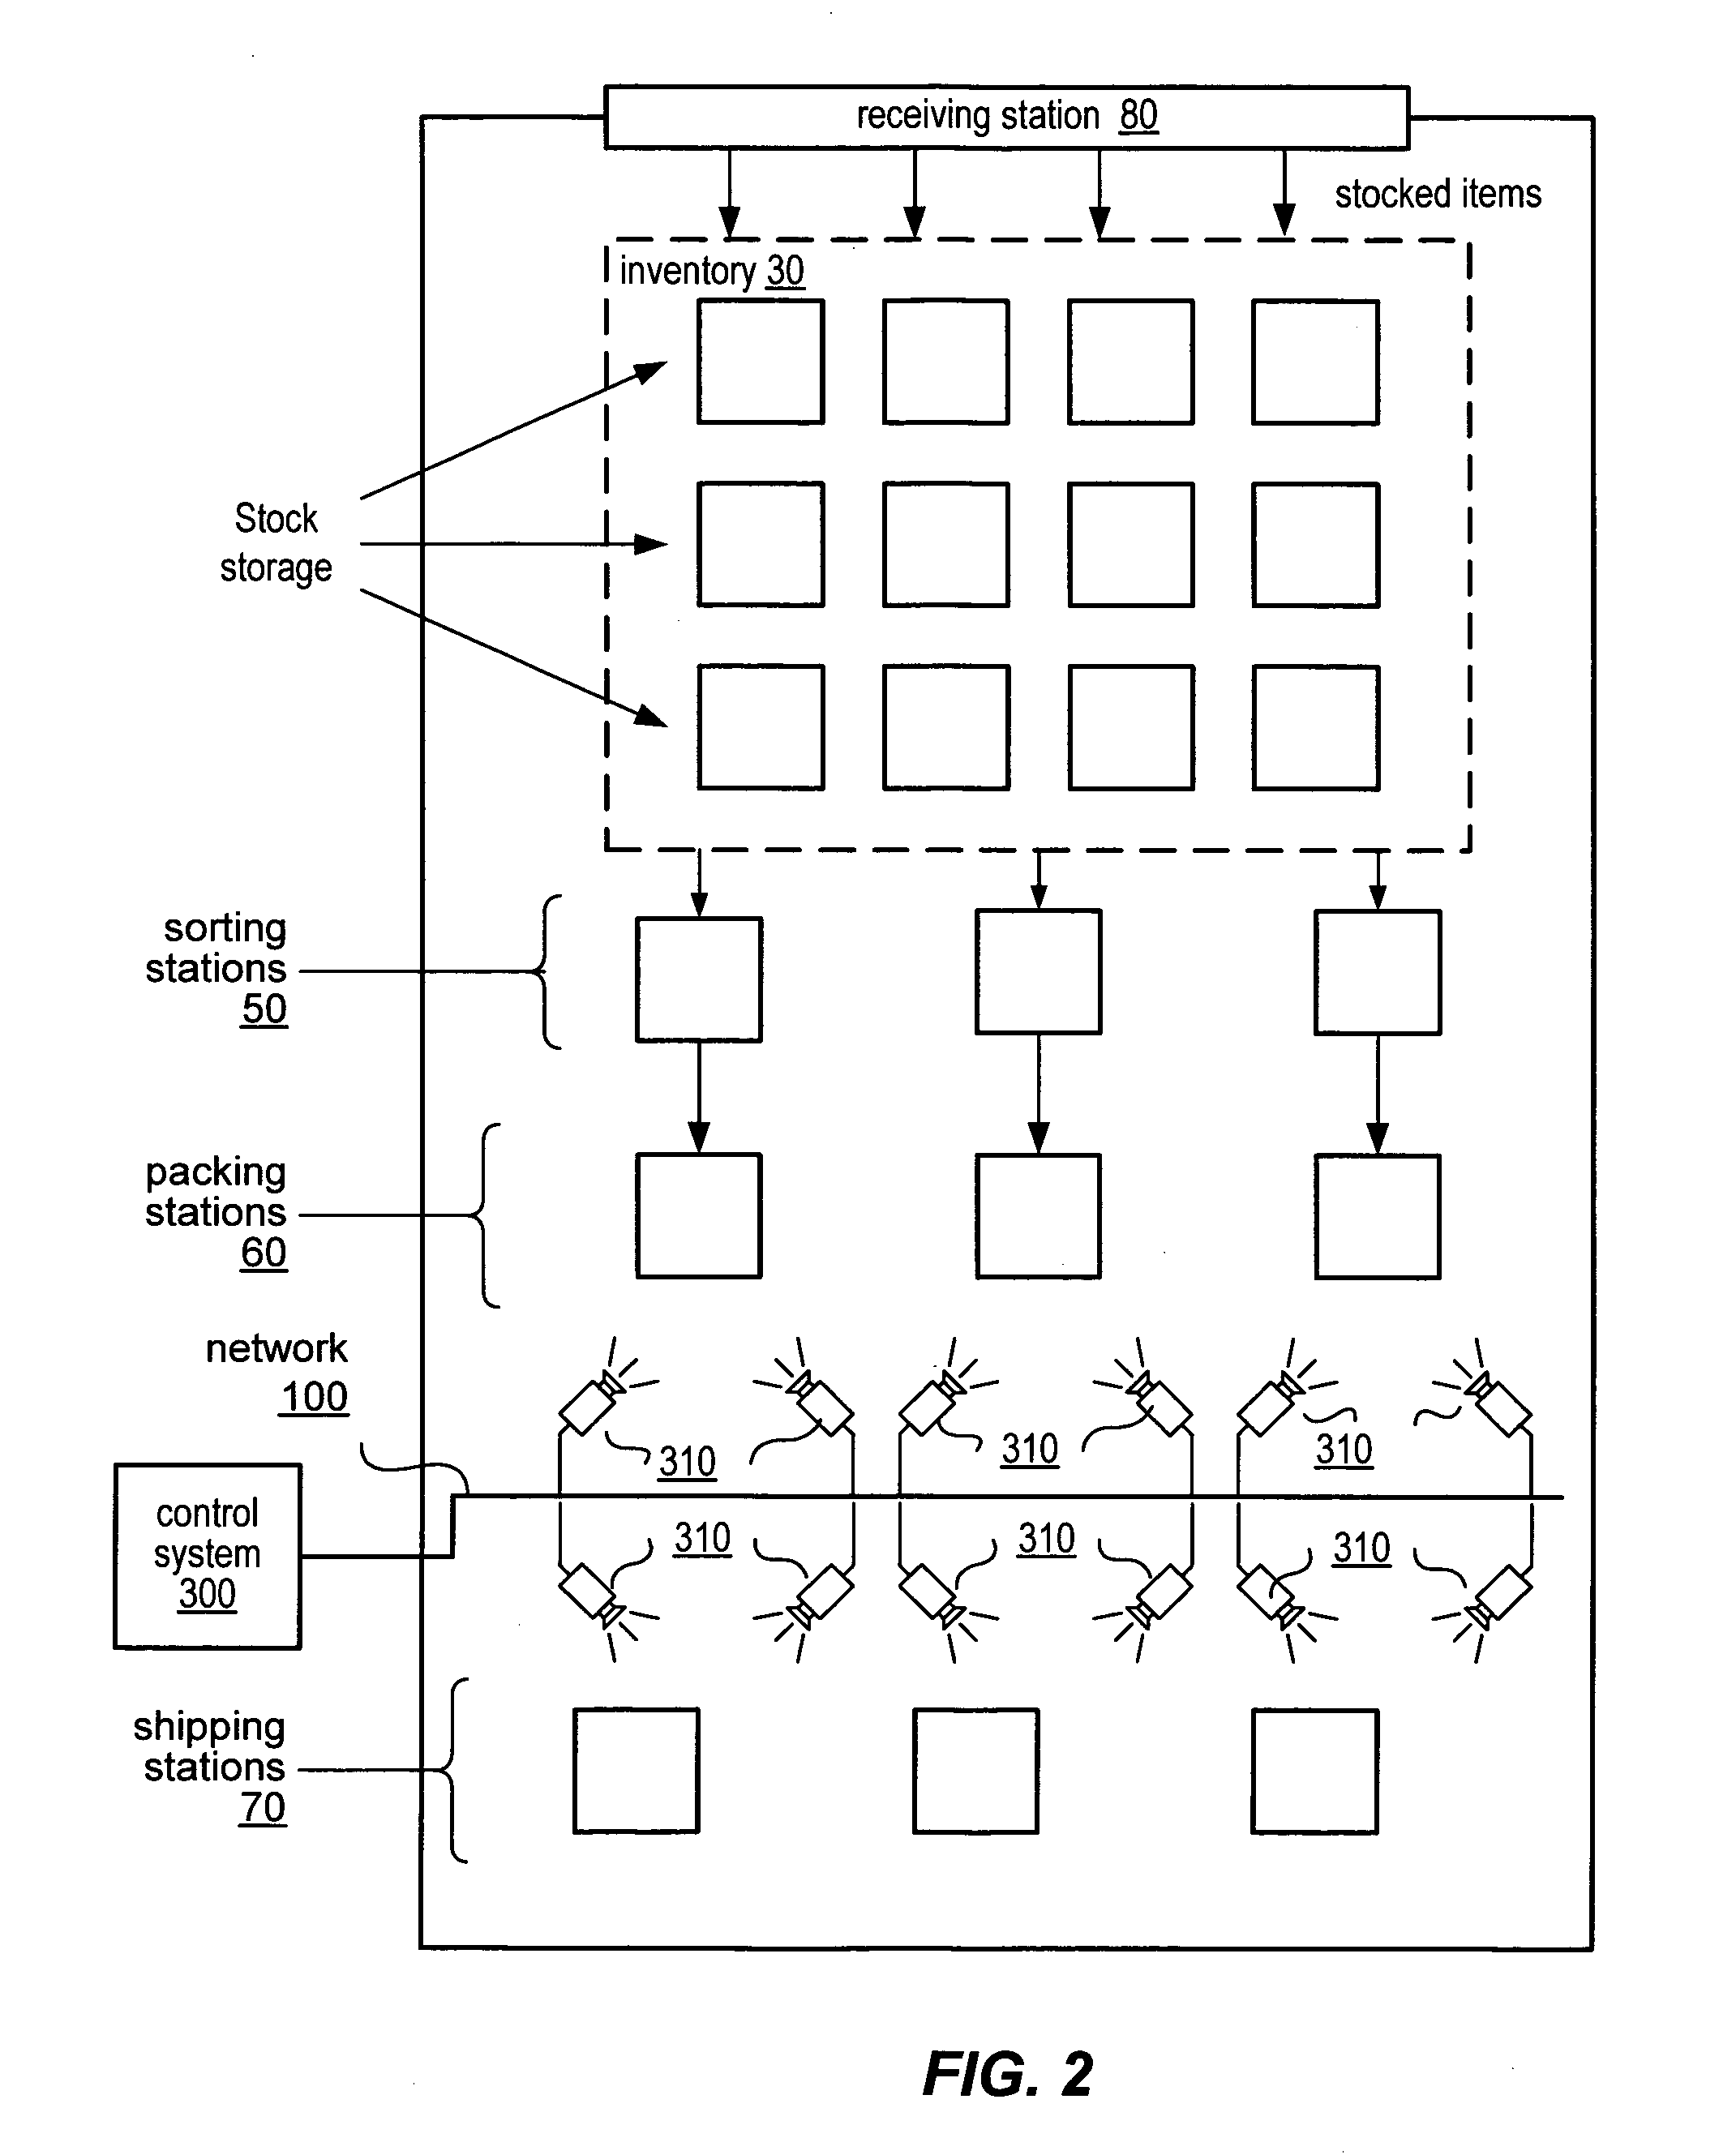 System and method for visual verification of order processing